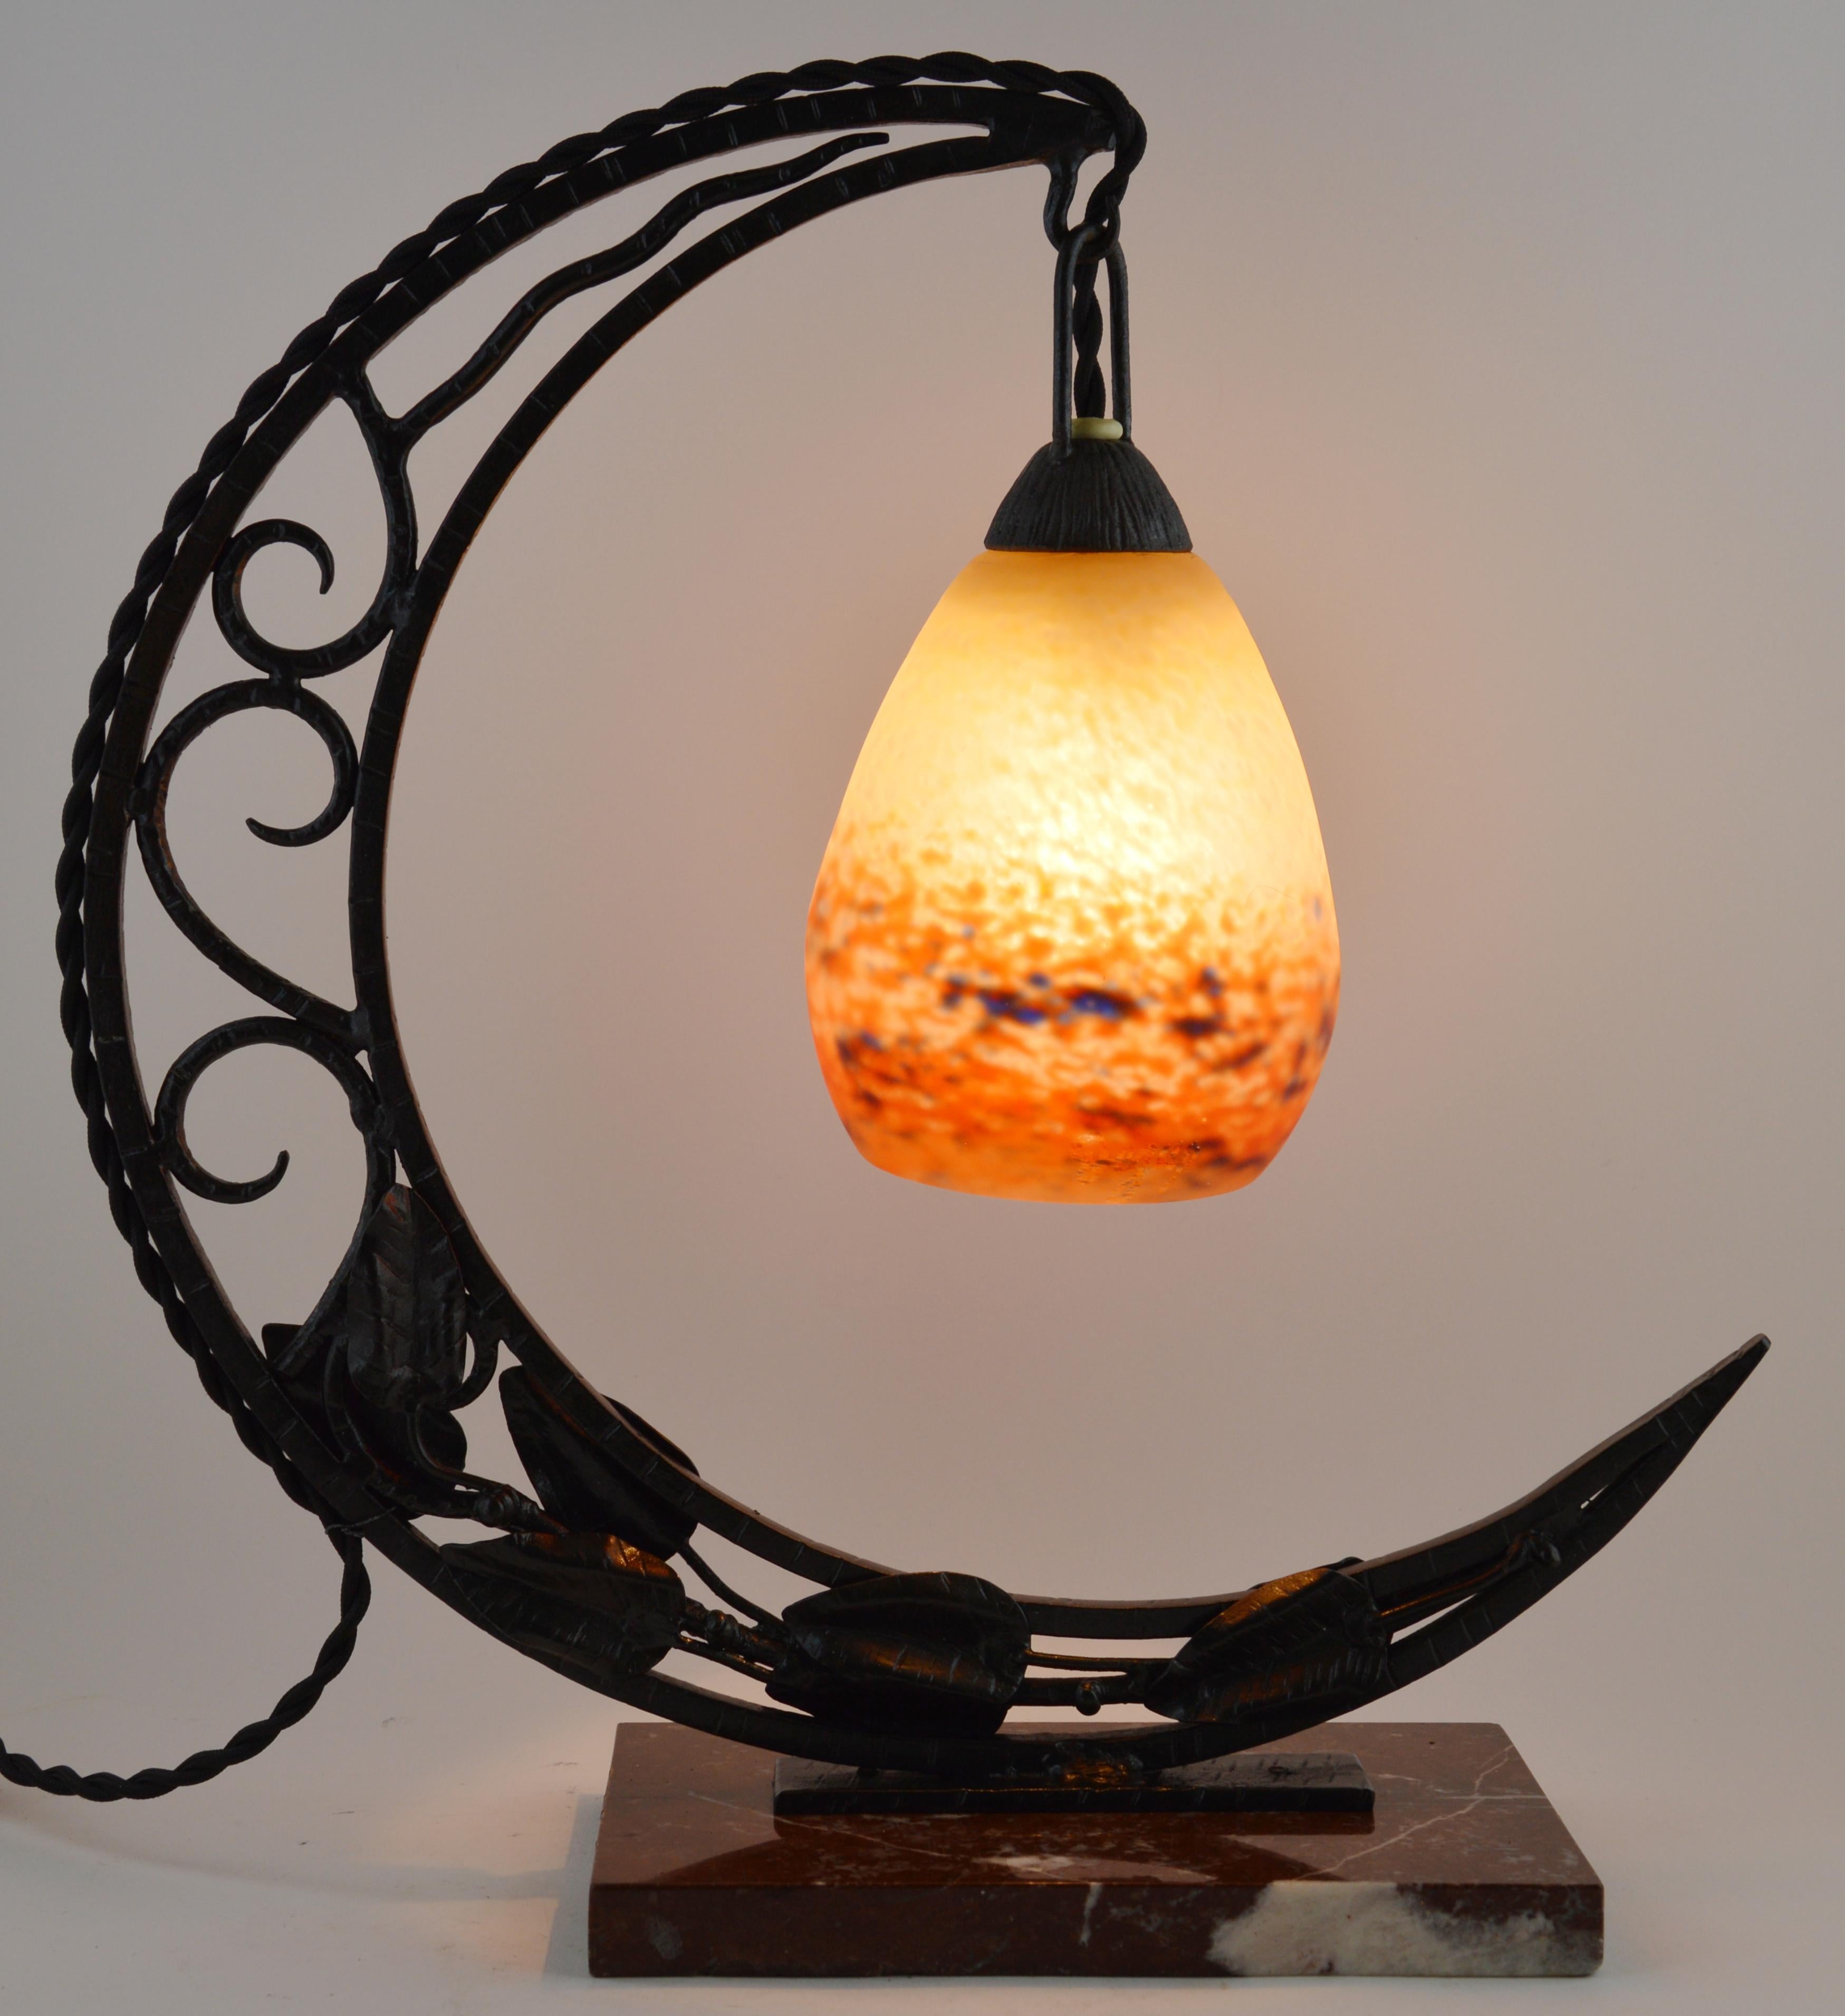 Large French Art Deco table lamp by Degué (Compiegne), France, 1920s. This lamp has a blown glass shade on its wrought iron frame crescent-shaped. Measures: Height 15.2